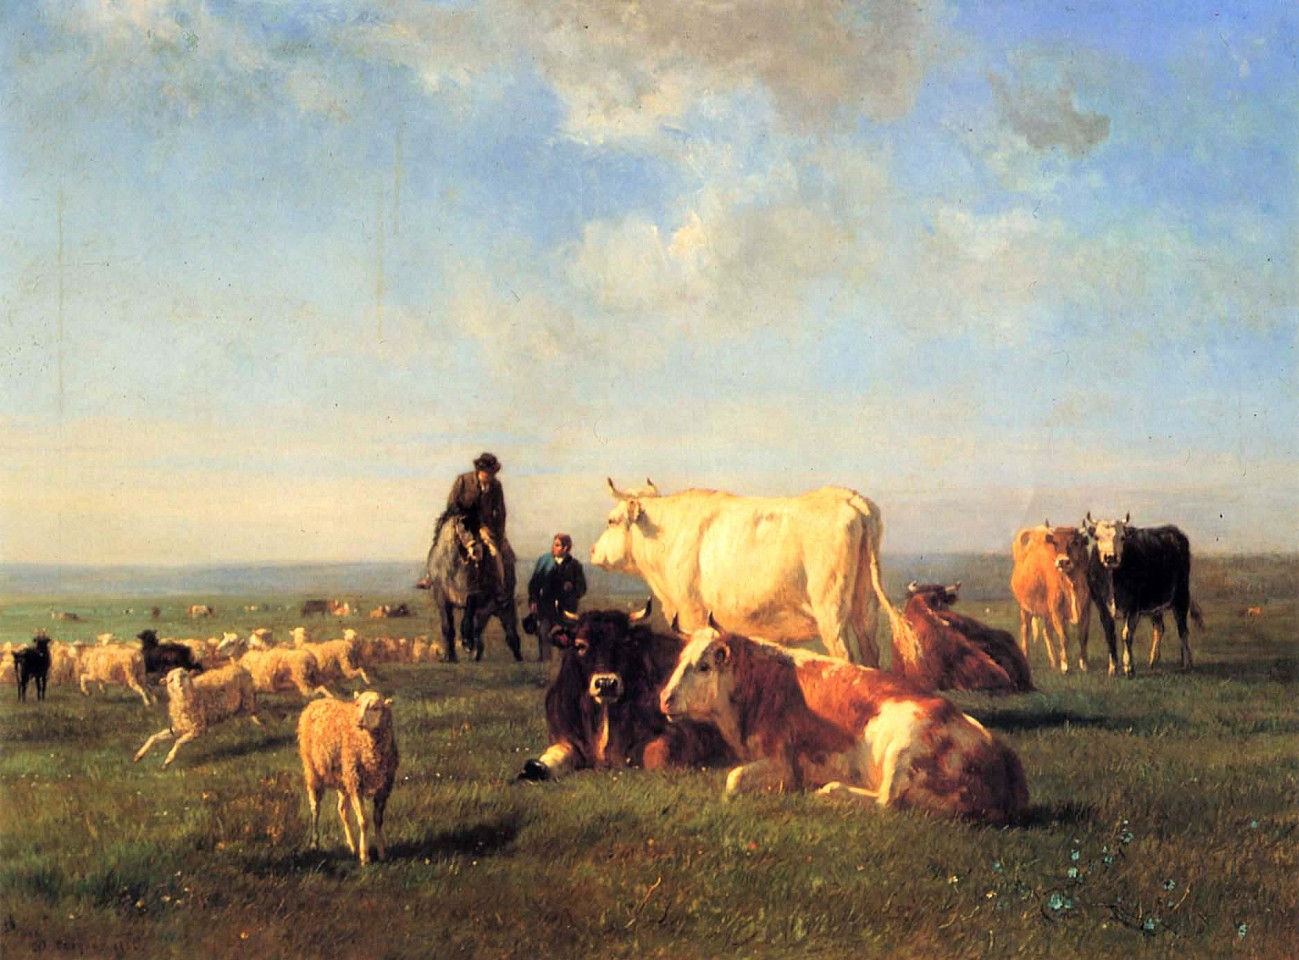 Constant Troyon, Cows and Sheep Grazing, 1862
Oil on canvas, 31 1/2 x 42 1/2 in. (80 x 108 cm)
TRO-003-PA
$70,000